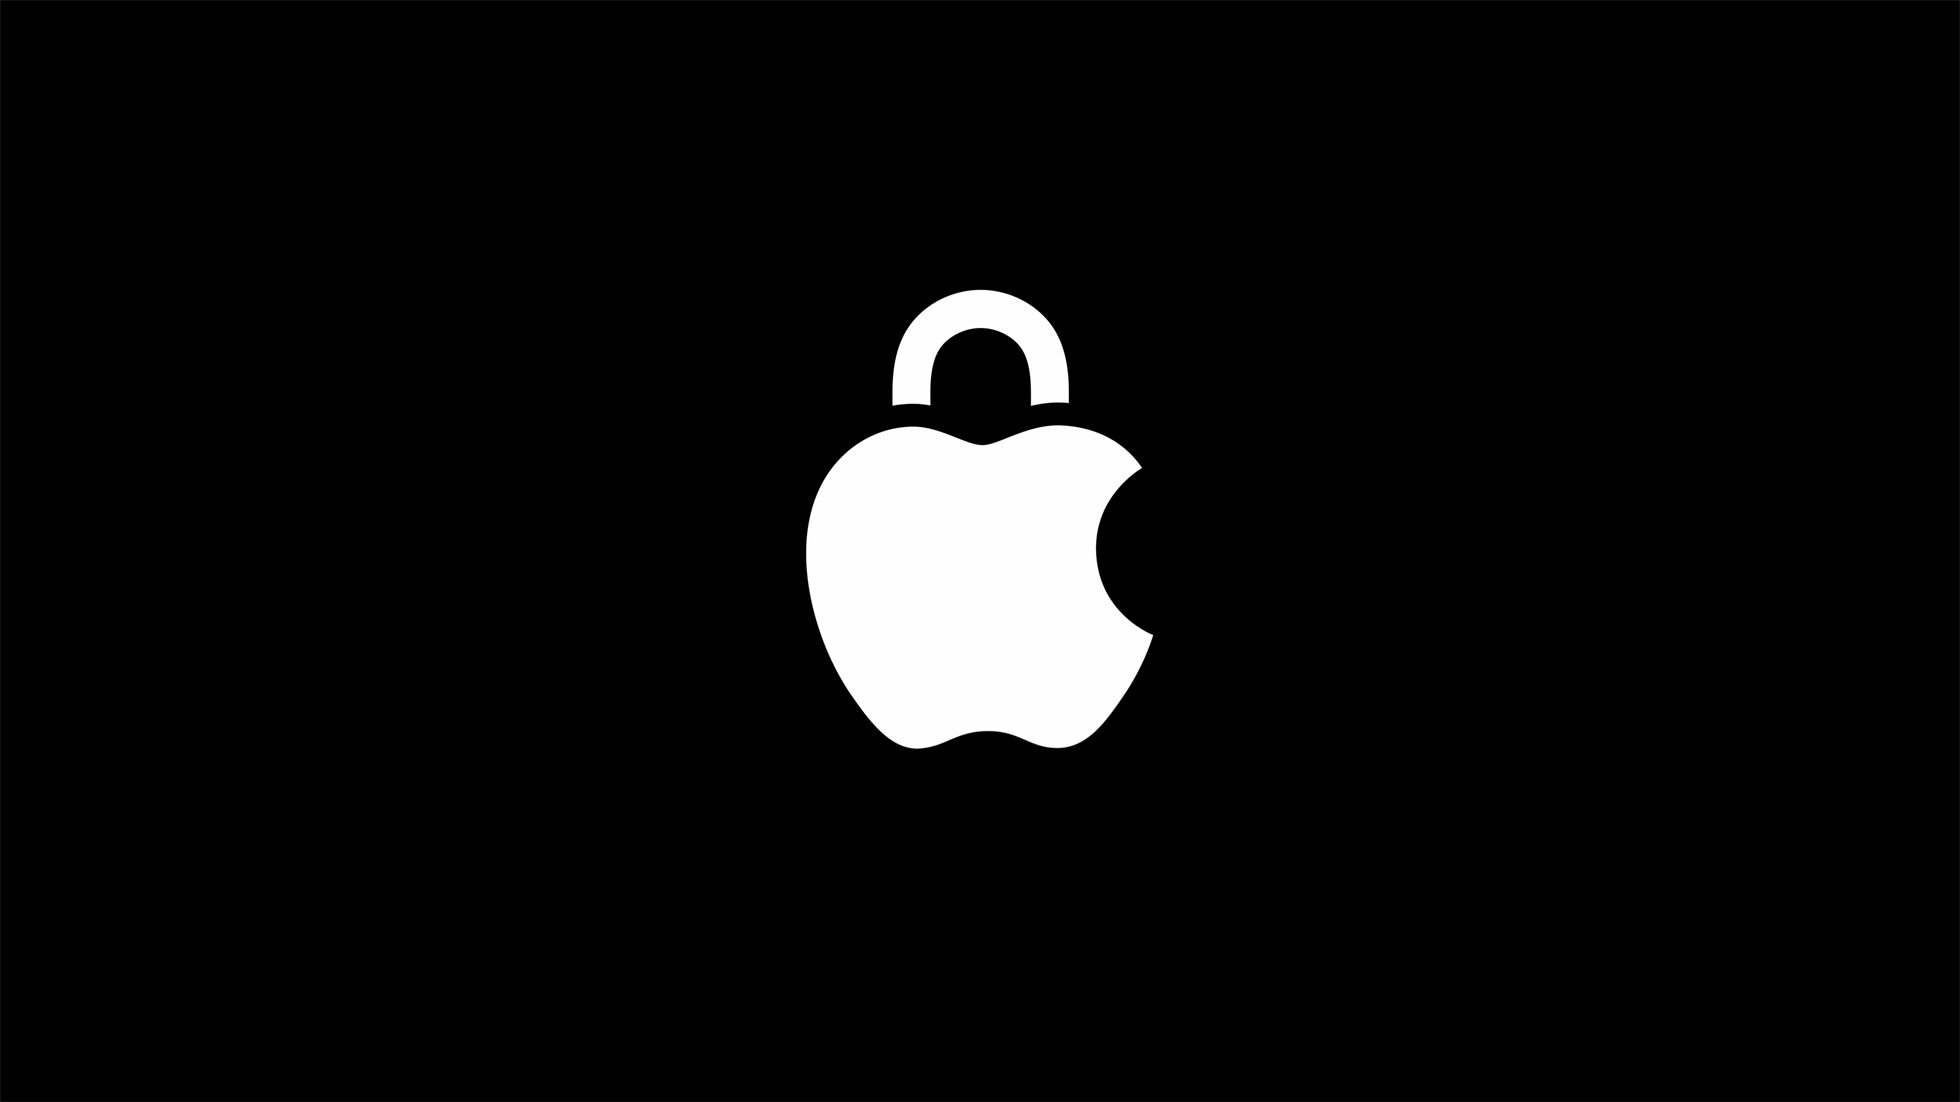 Apple Increases the Stakes in the Consumer Privacy Wars